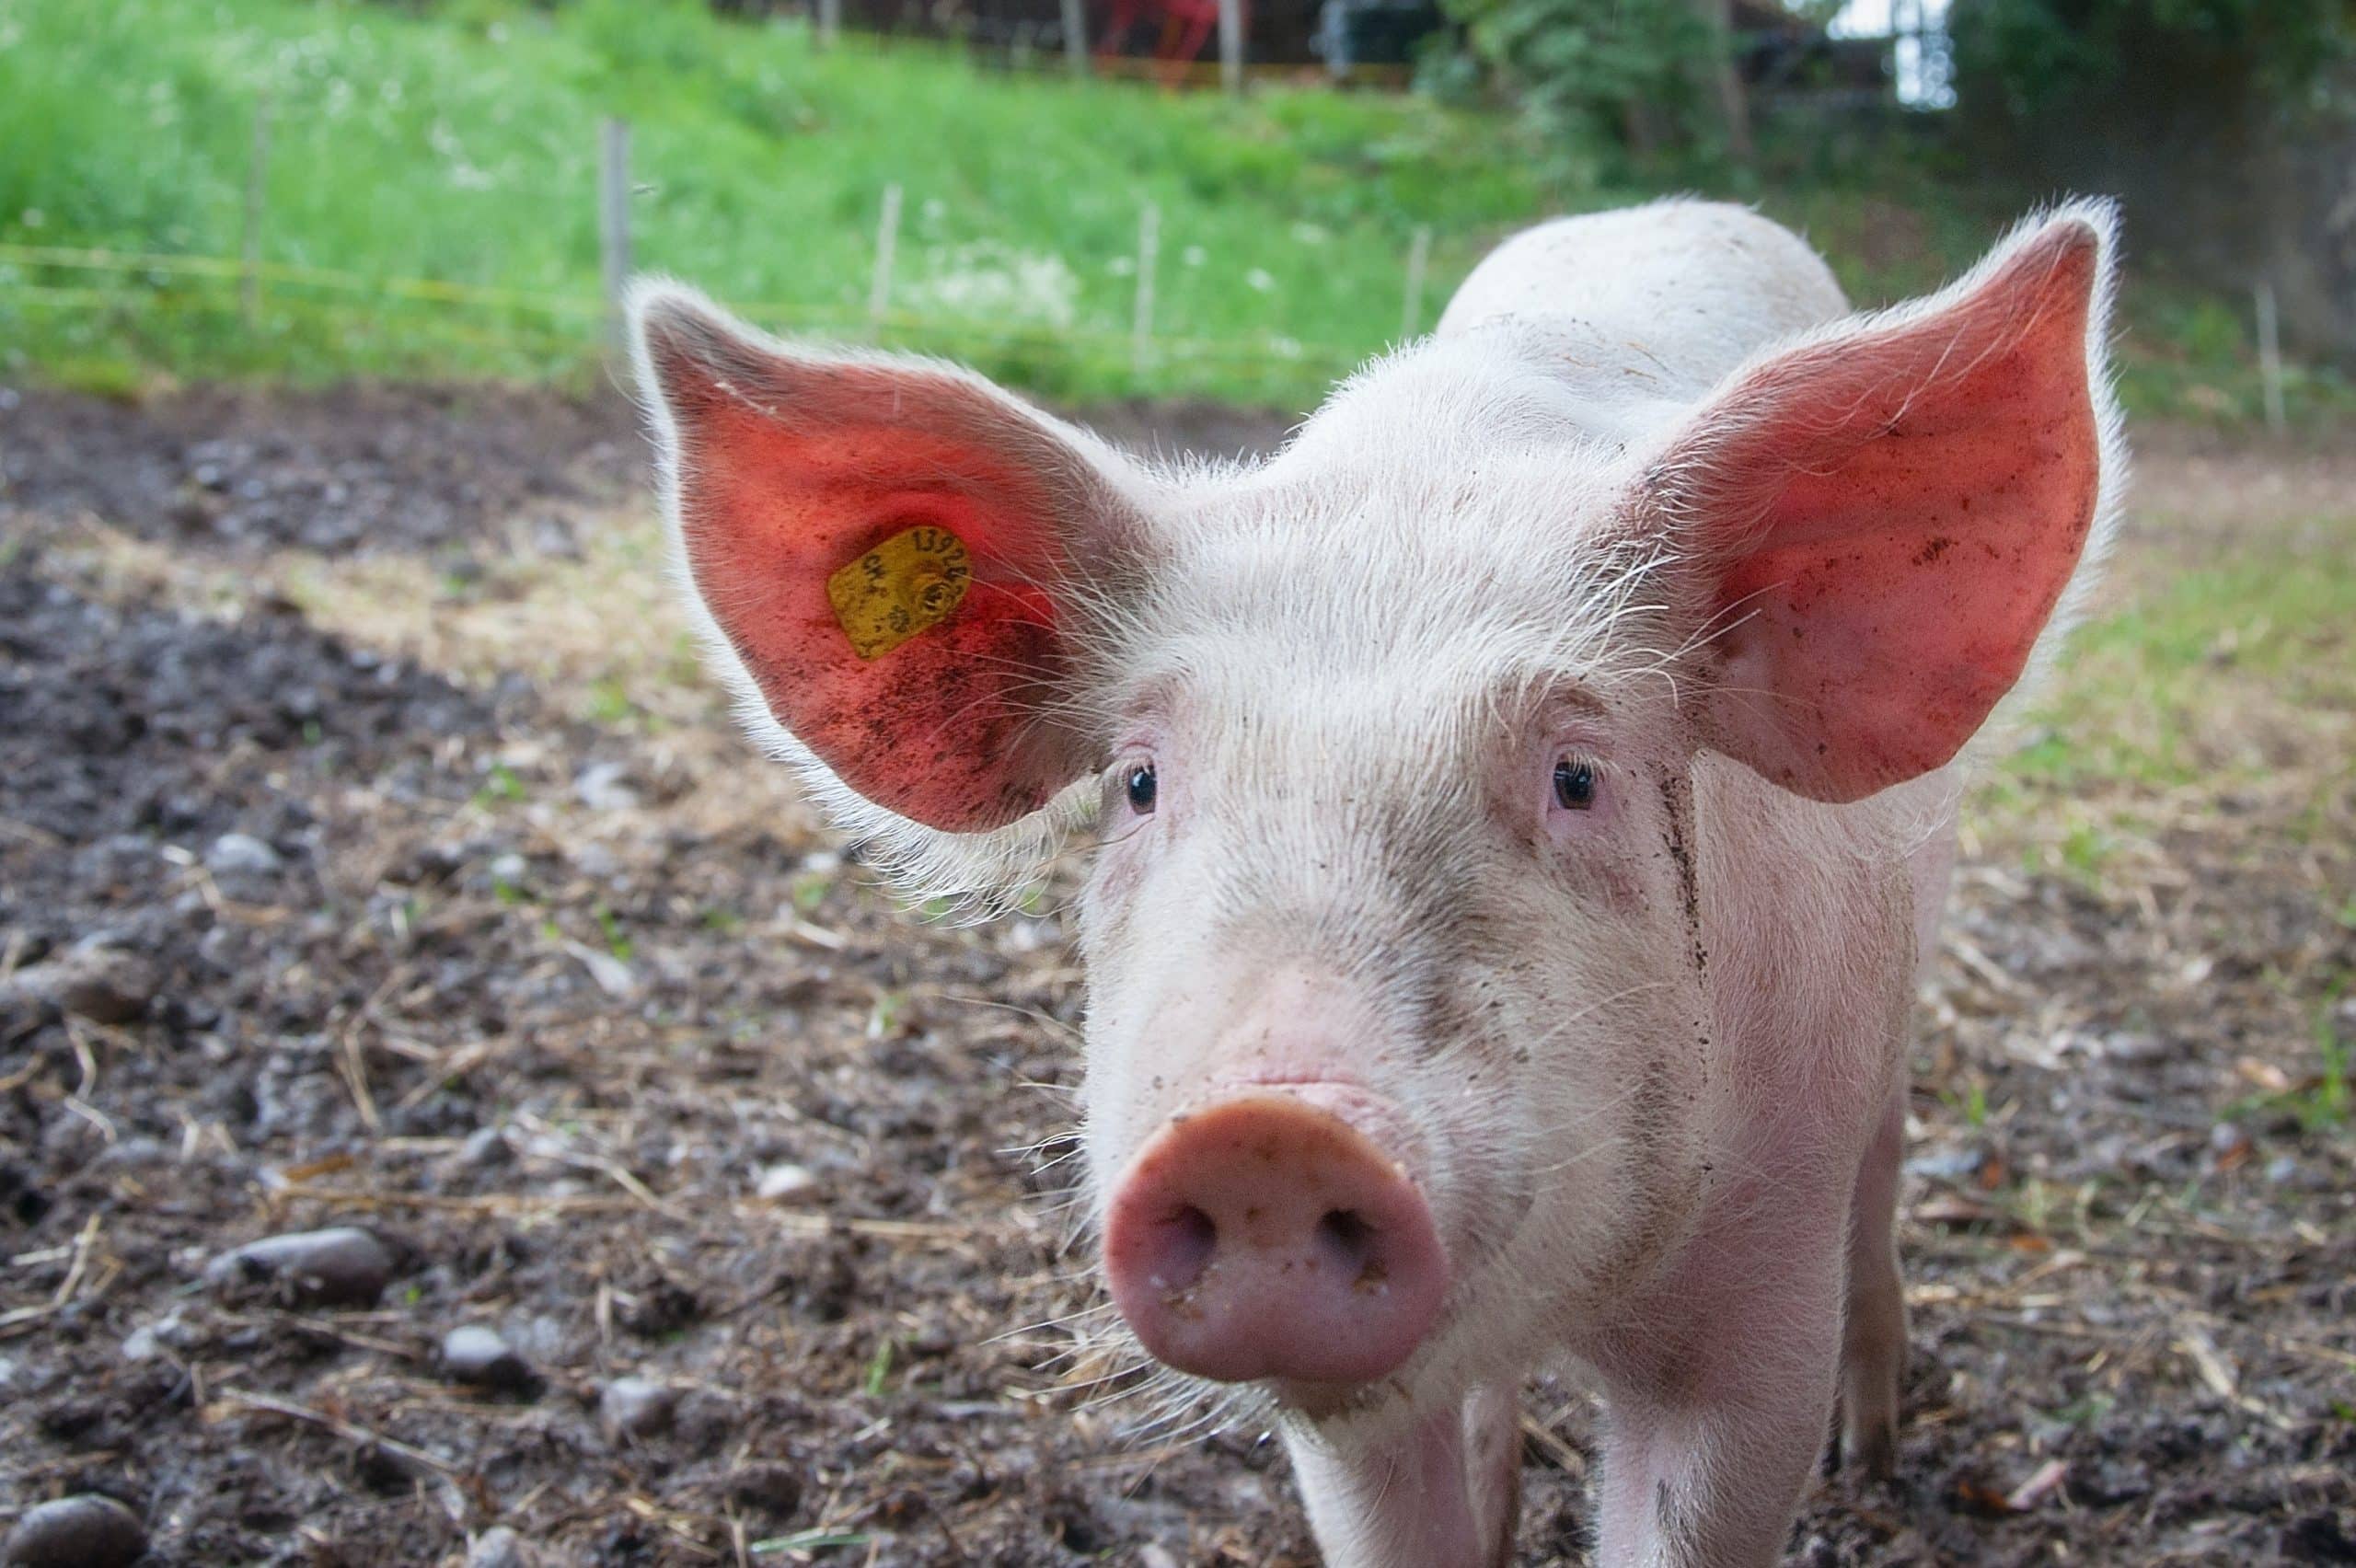 Face of pig standing in mud  Photo by mali maeder: https://www.pexels.com/photo/white-pig-110820/